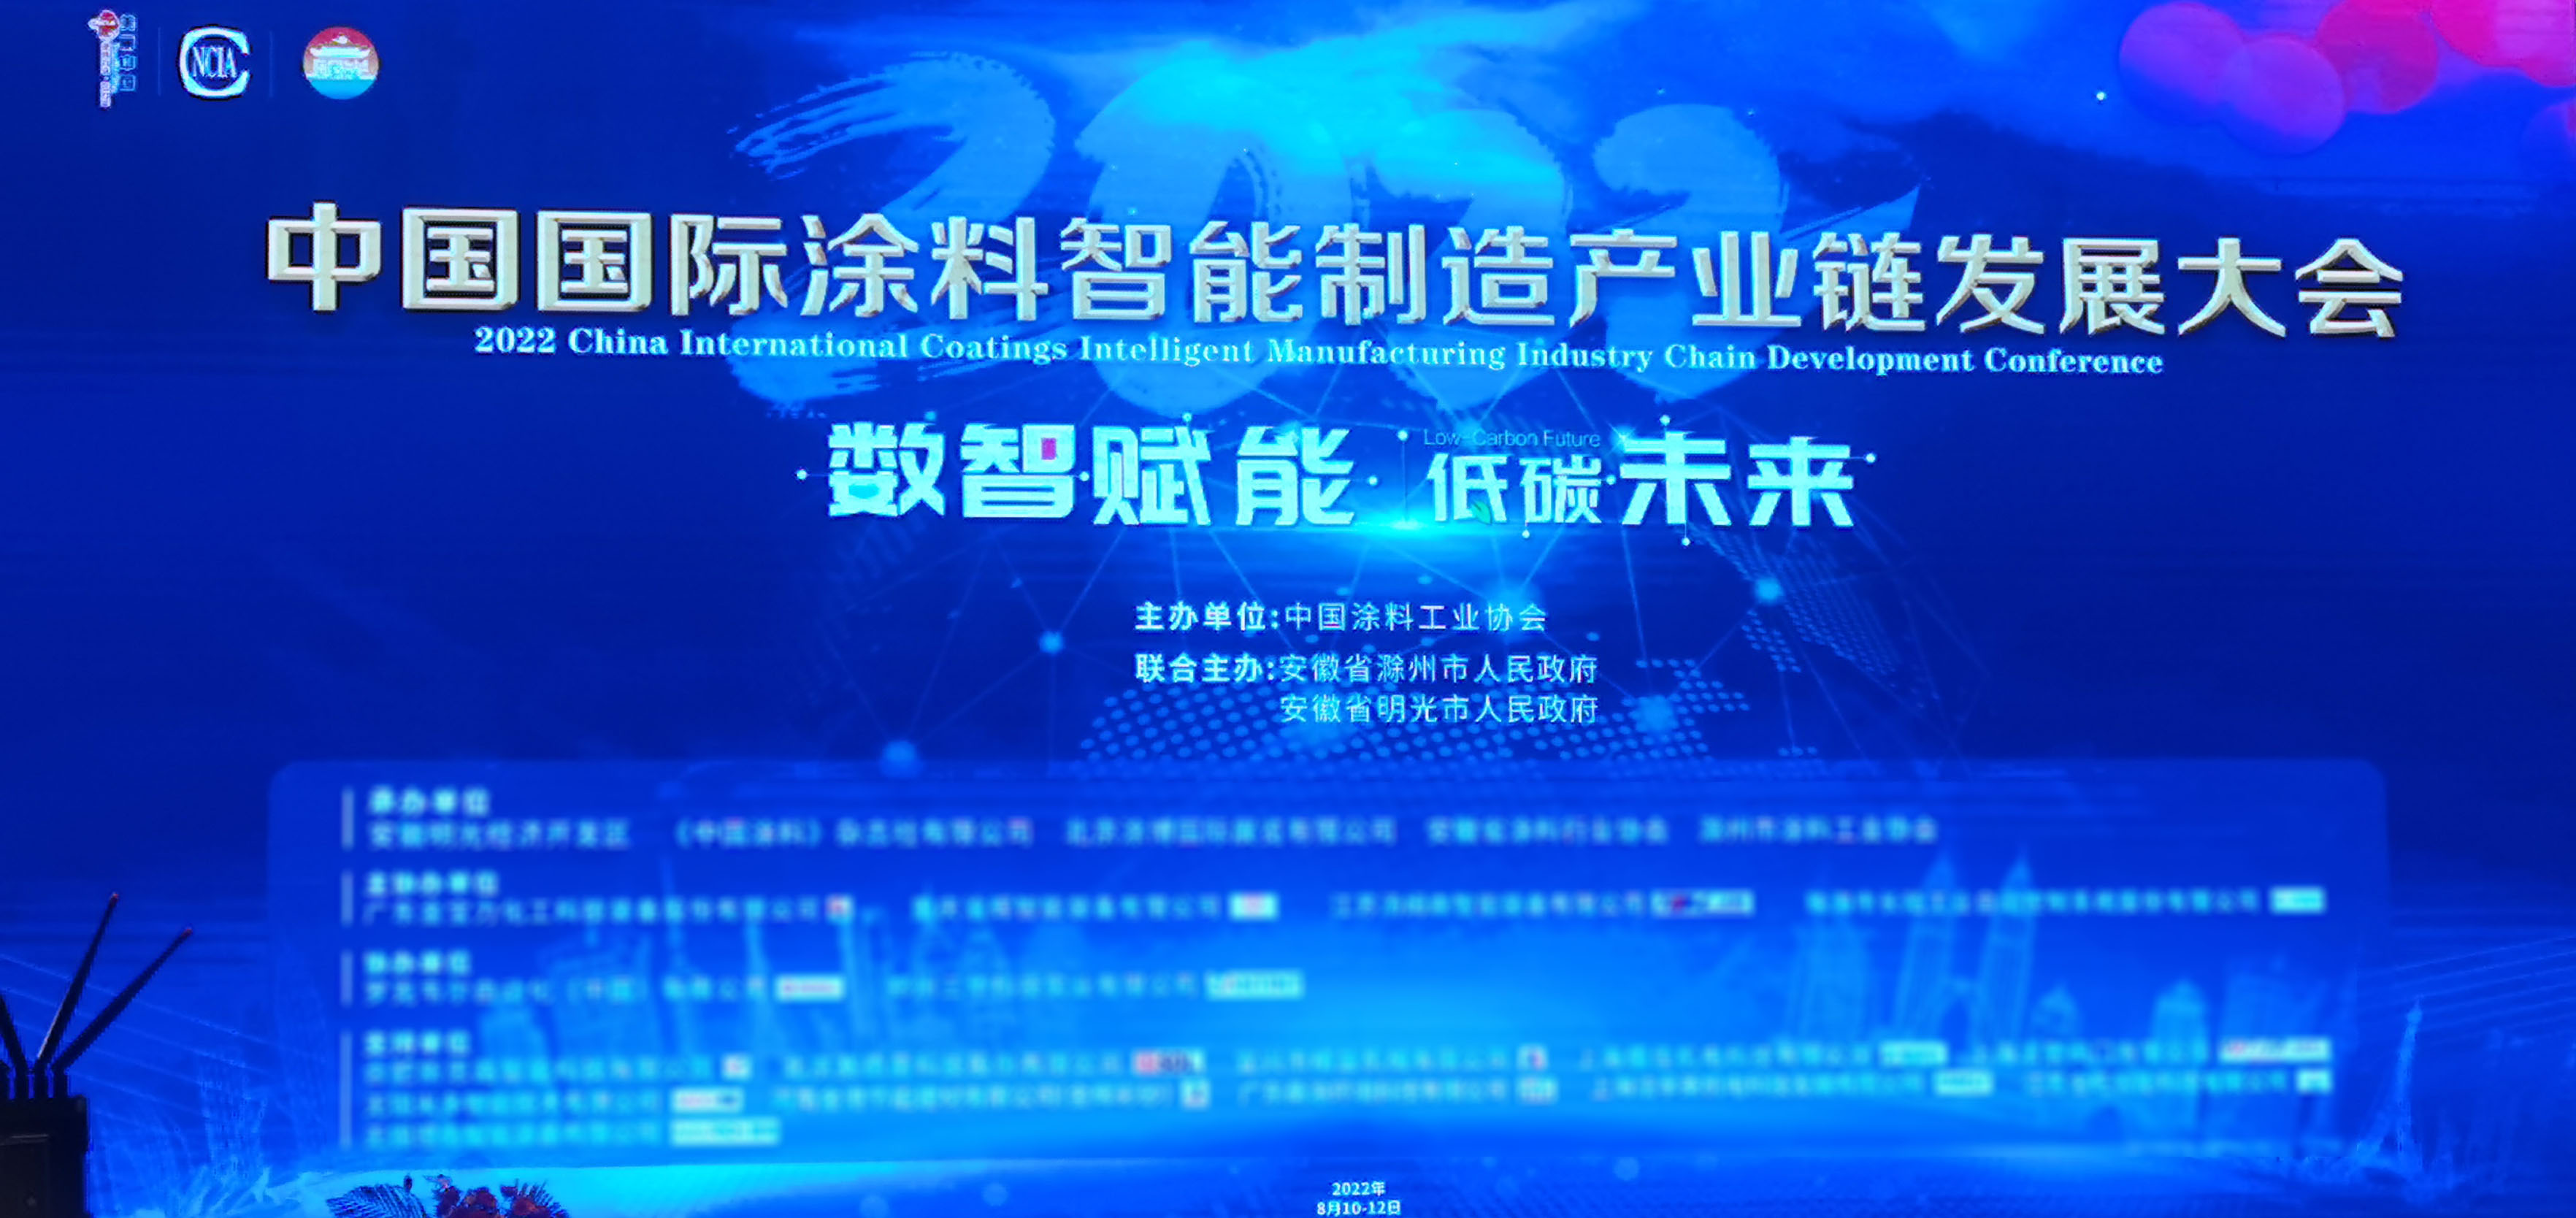 Shanghai Sower was invited to participate in the "2022 China International Coating intelligent manufacturing industry chain development conference"